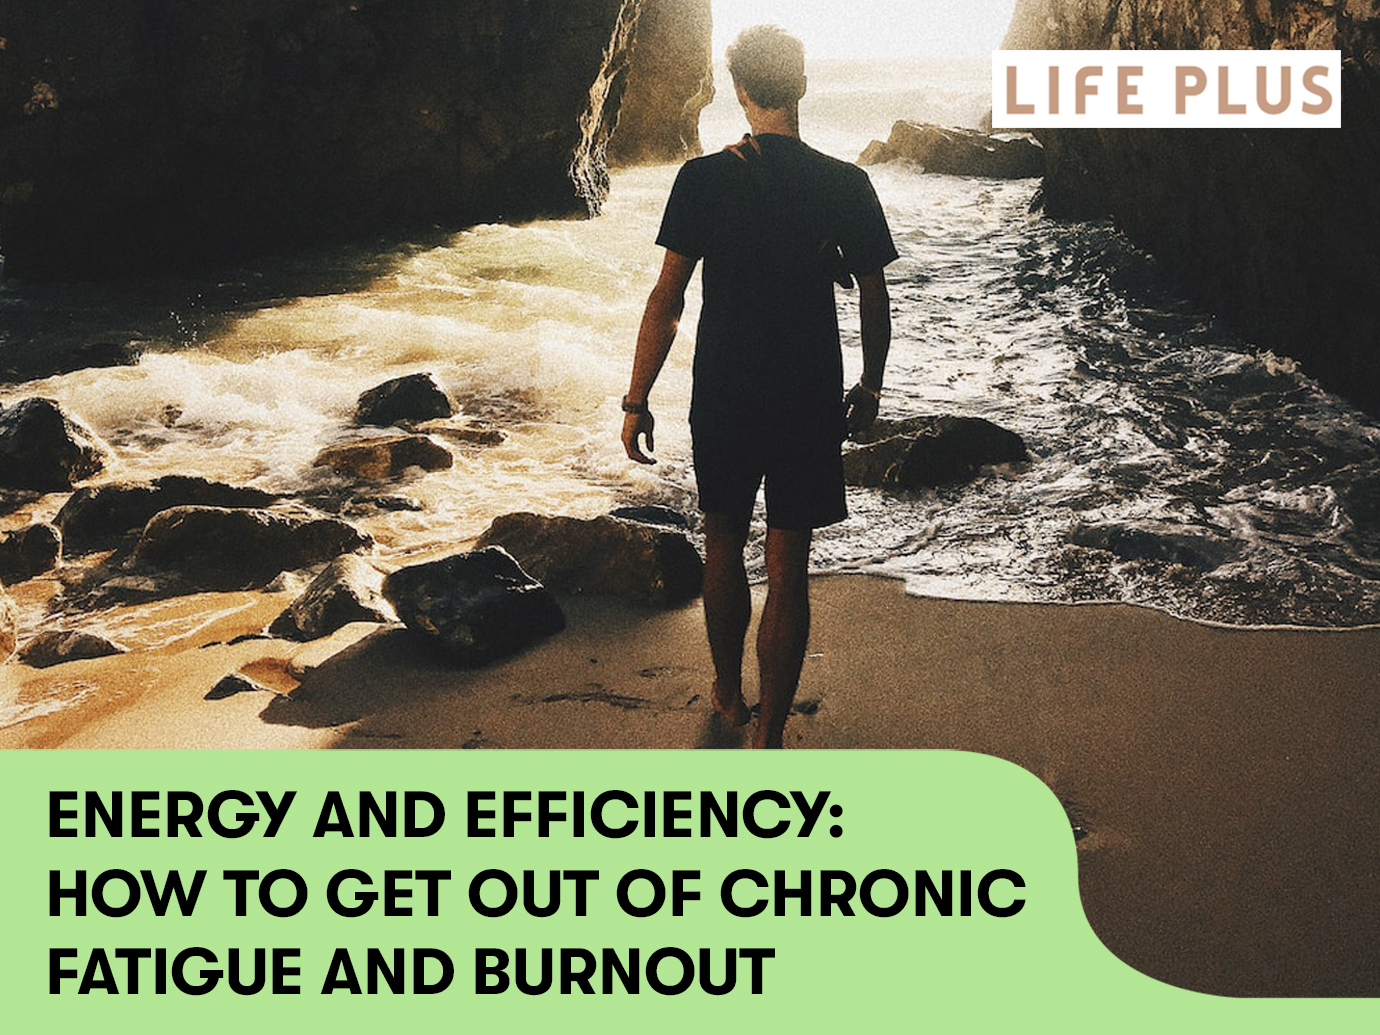 ENERGY AND EFFICIENCY: HOW TO GET OUT OF CHRONIC FATIGUE AND BURNOUT